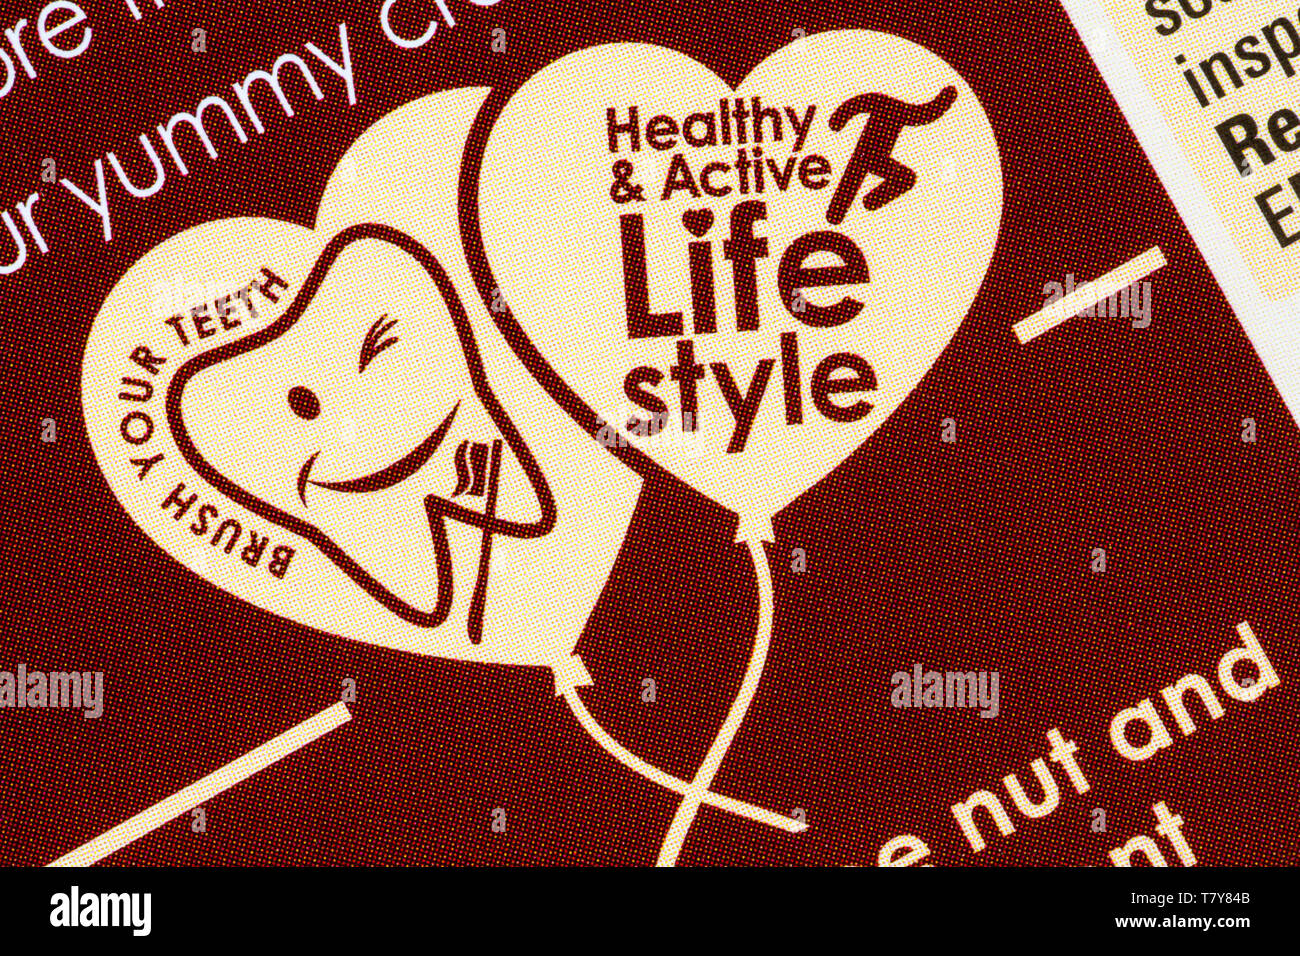 Brush your teeth, healthy & active life style symbols - detail on box of Kinnerton Peppa Pig Easter Gift Set Stock Photo